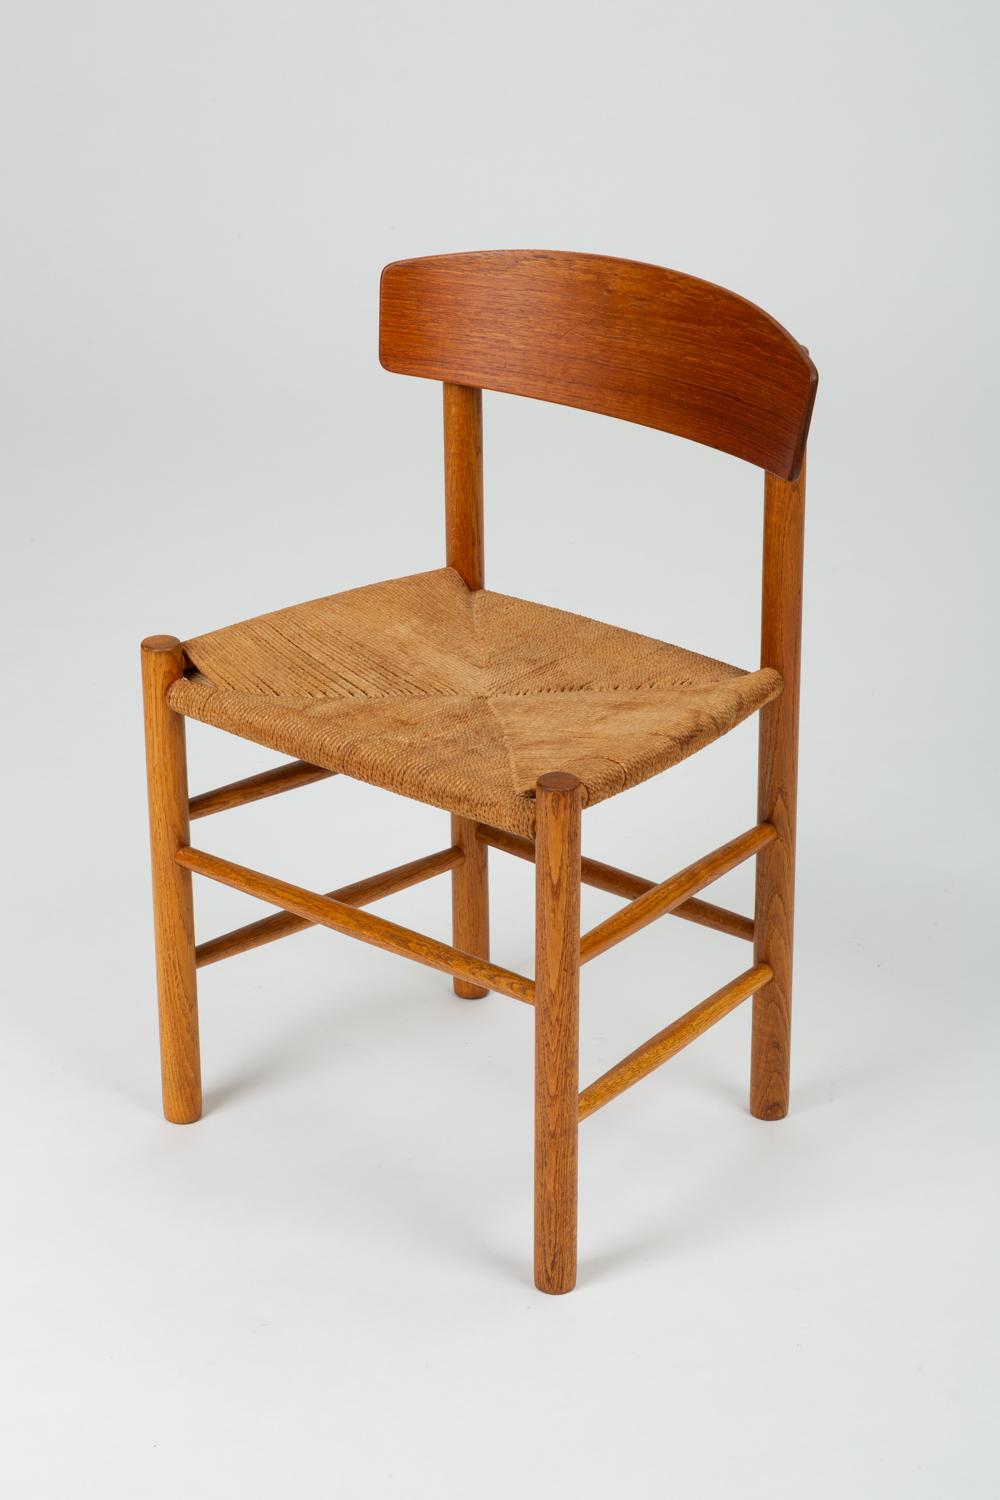 Hand-Woven Single J39 Oak Dining or Accent Chair by Børge Mogensen for FDB Møbler